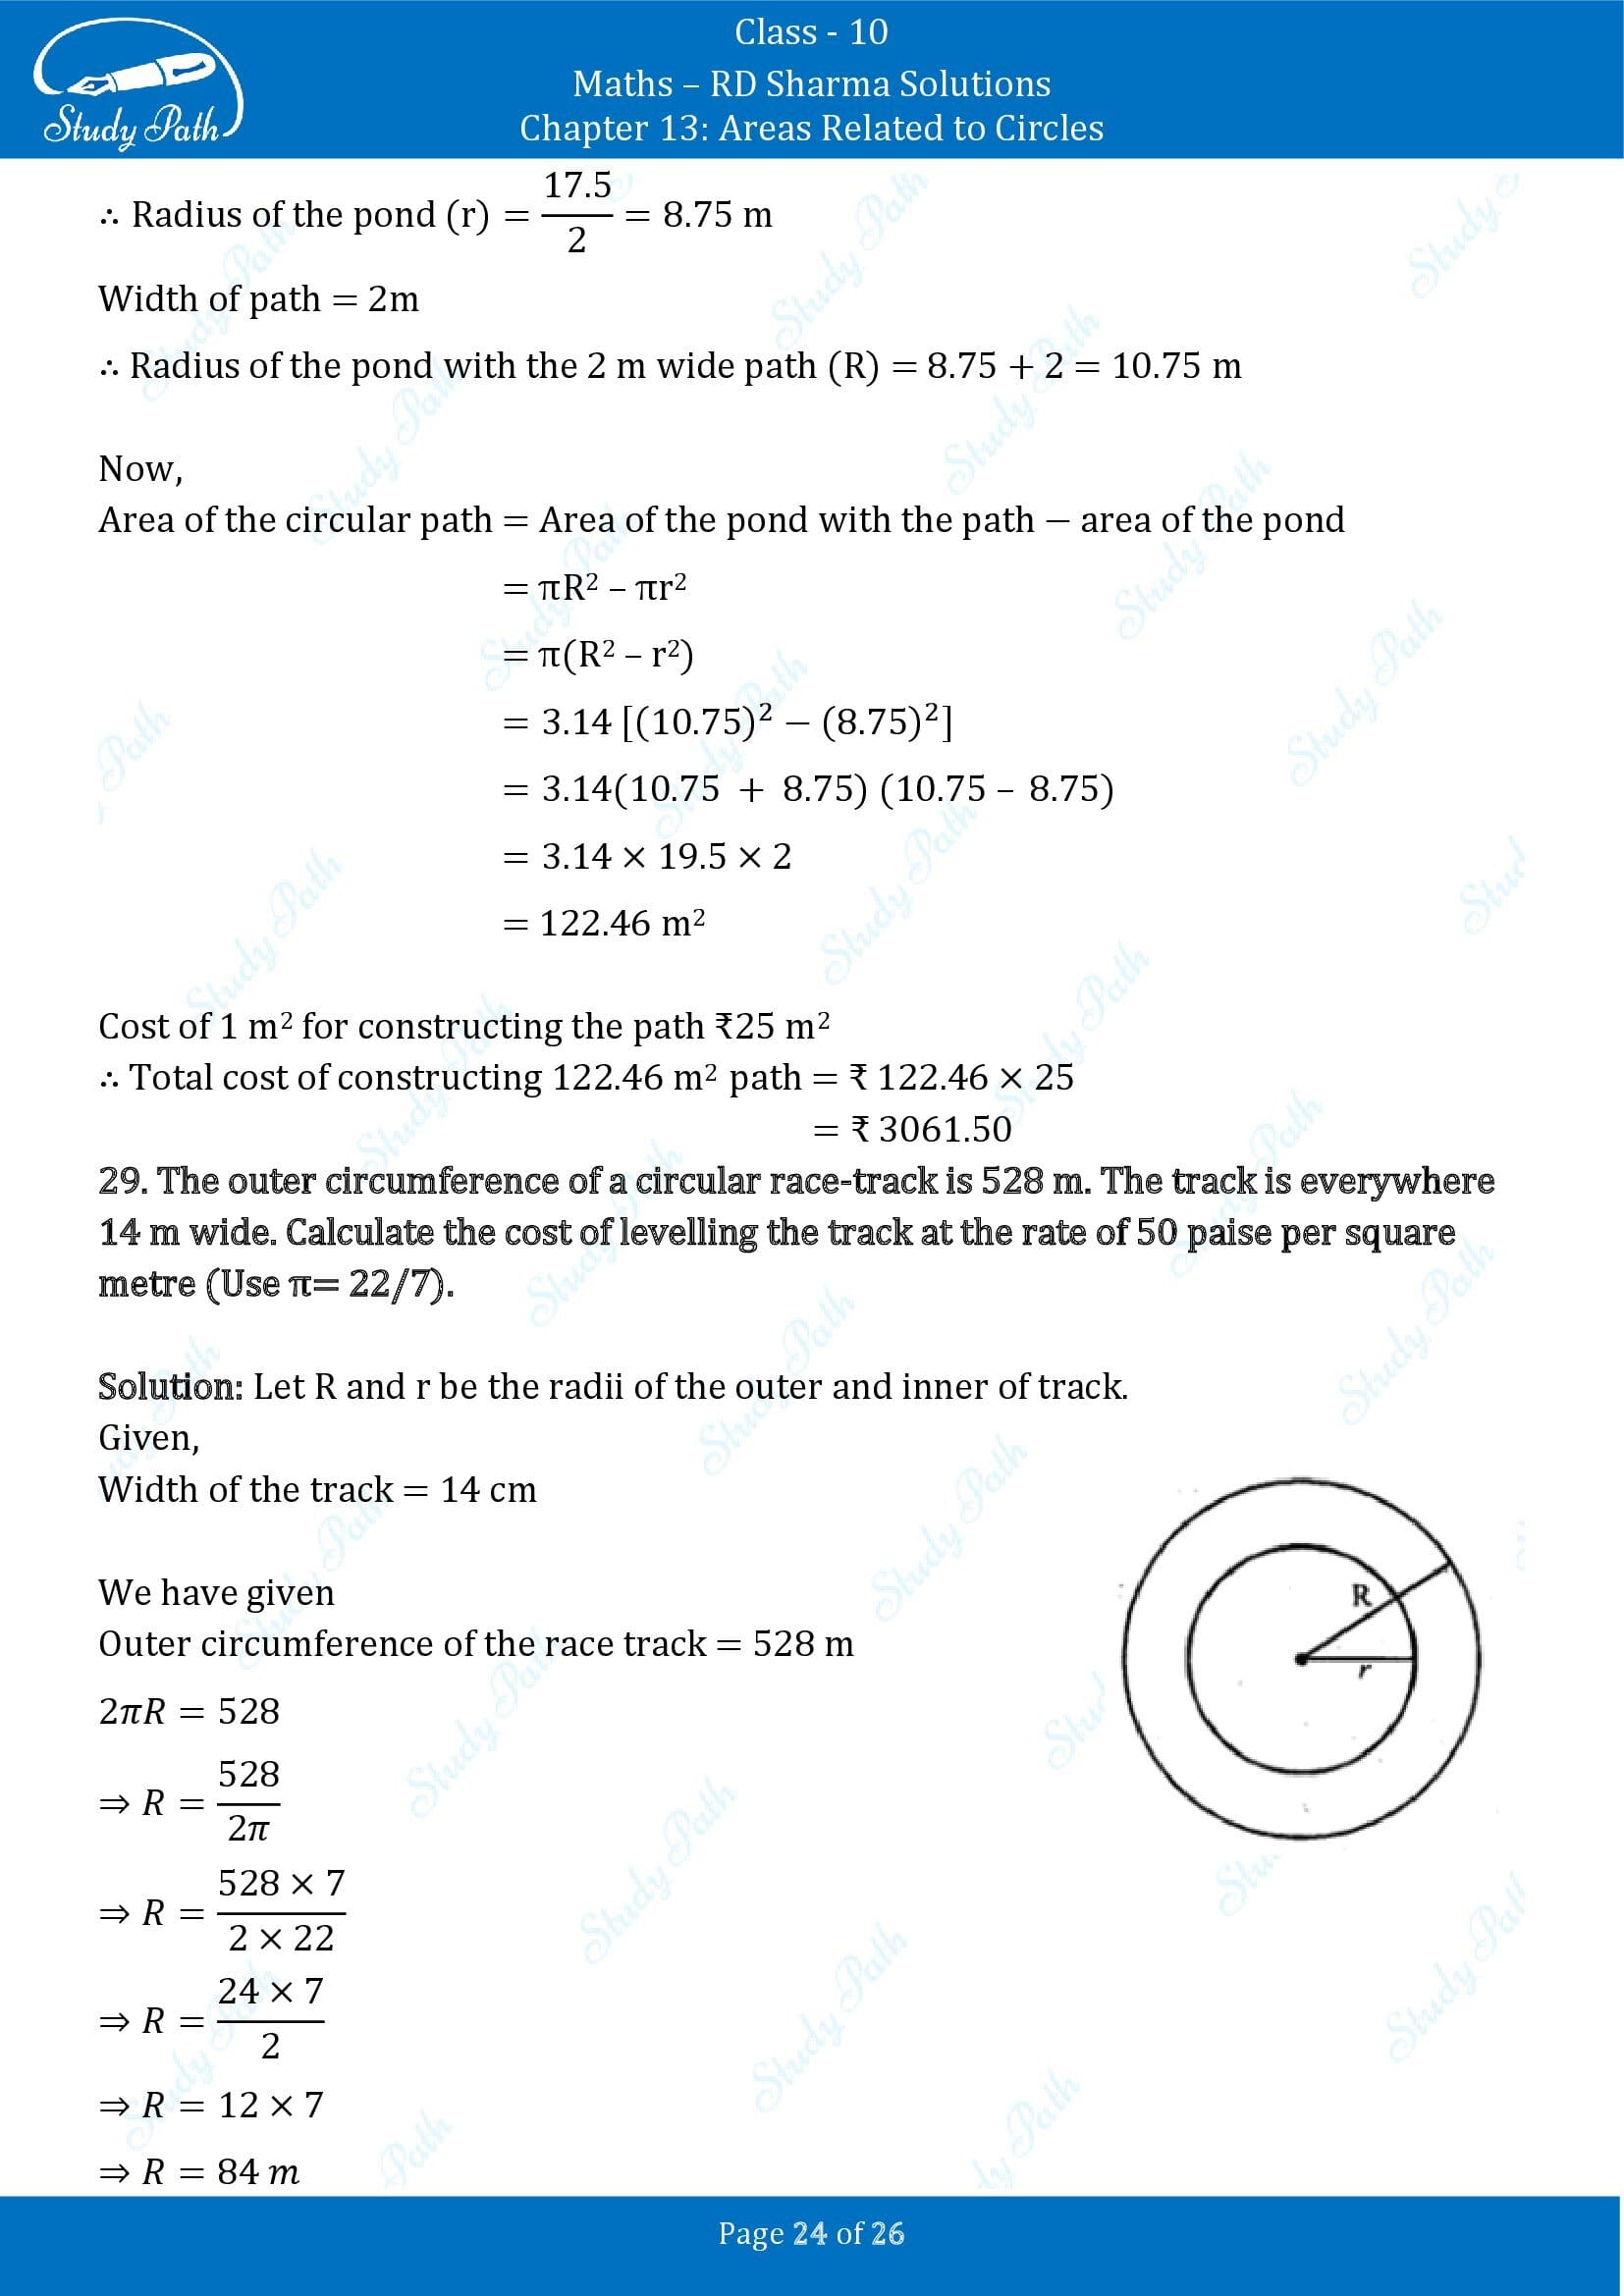 RD Sharma Solutions Class 10 Chapter 13 Areas Related to Circles Exercise 13.1 00024